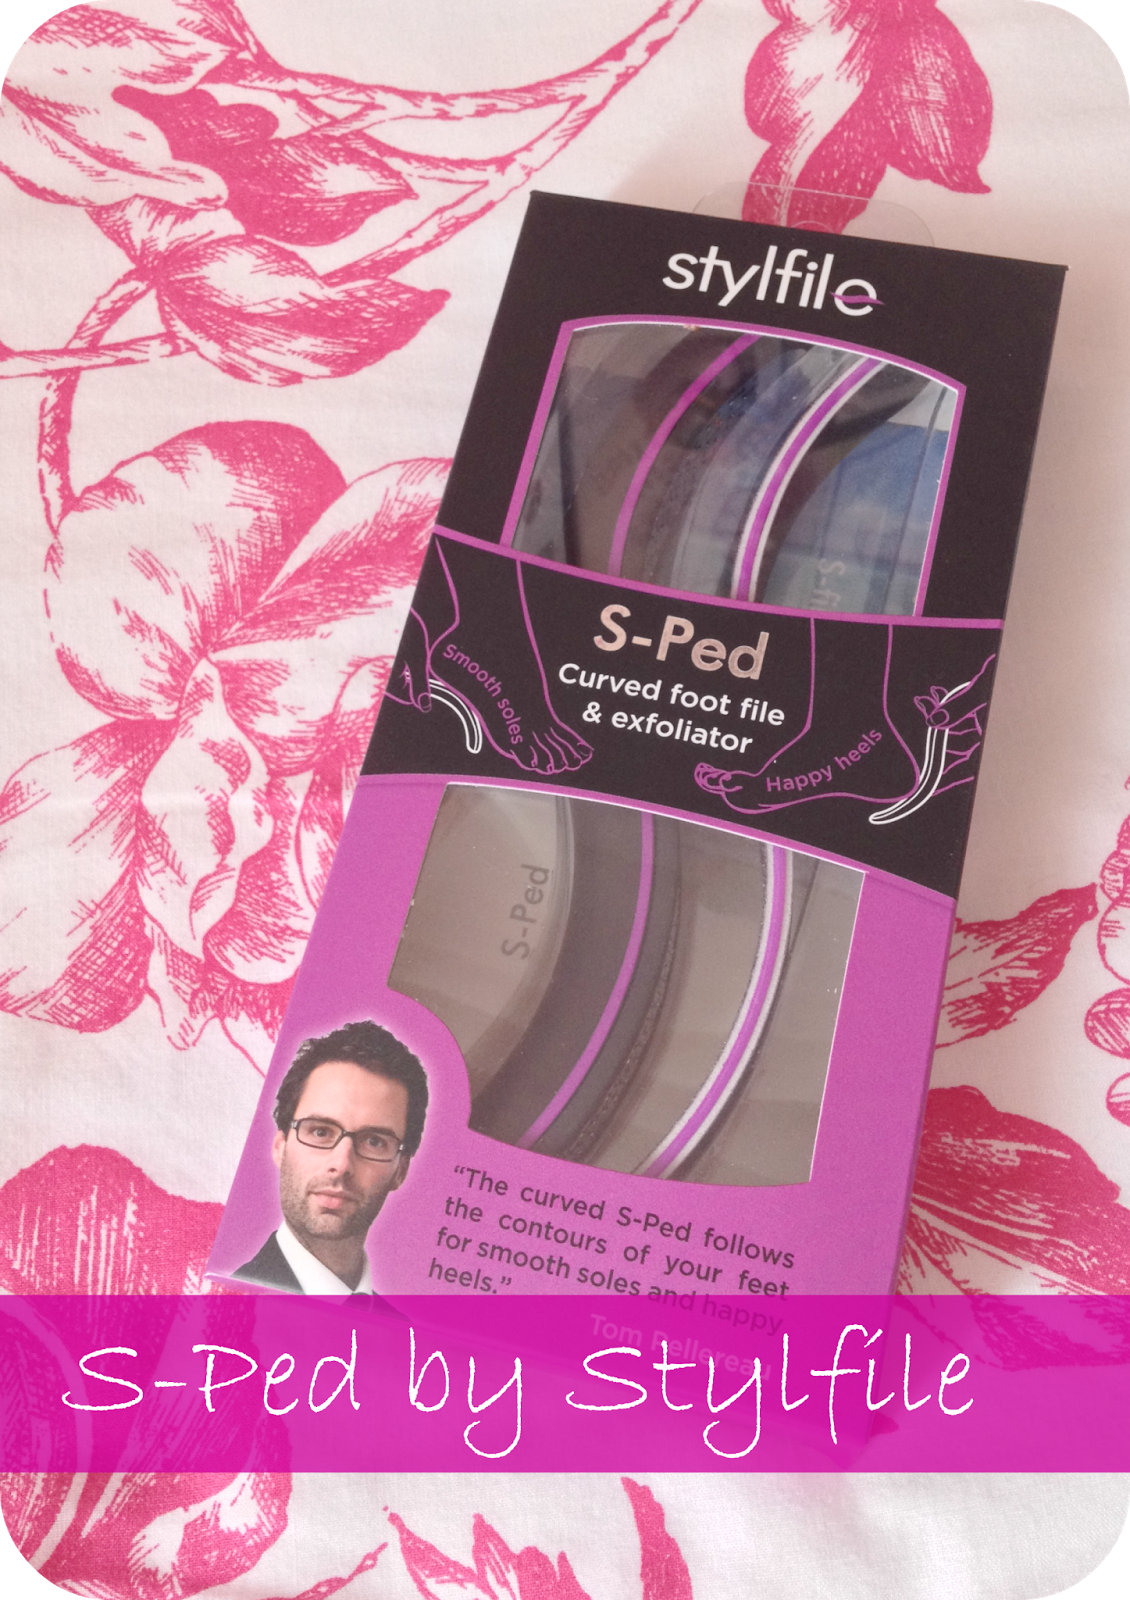 s-ped stylfile review